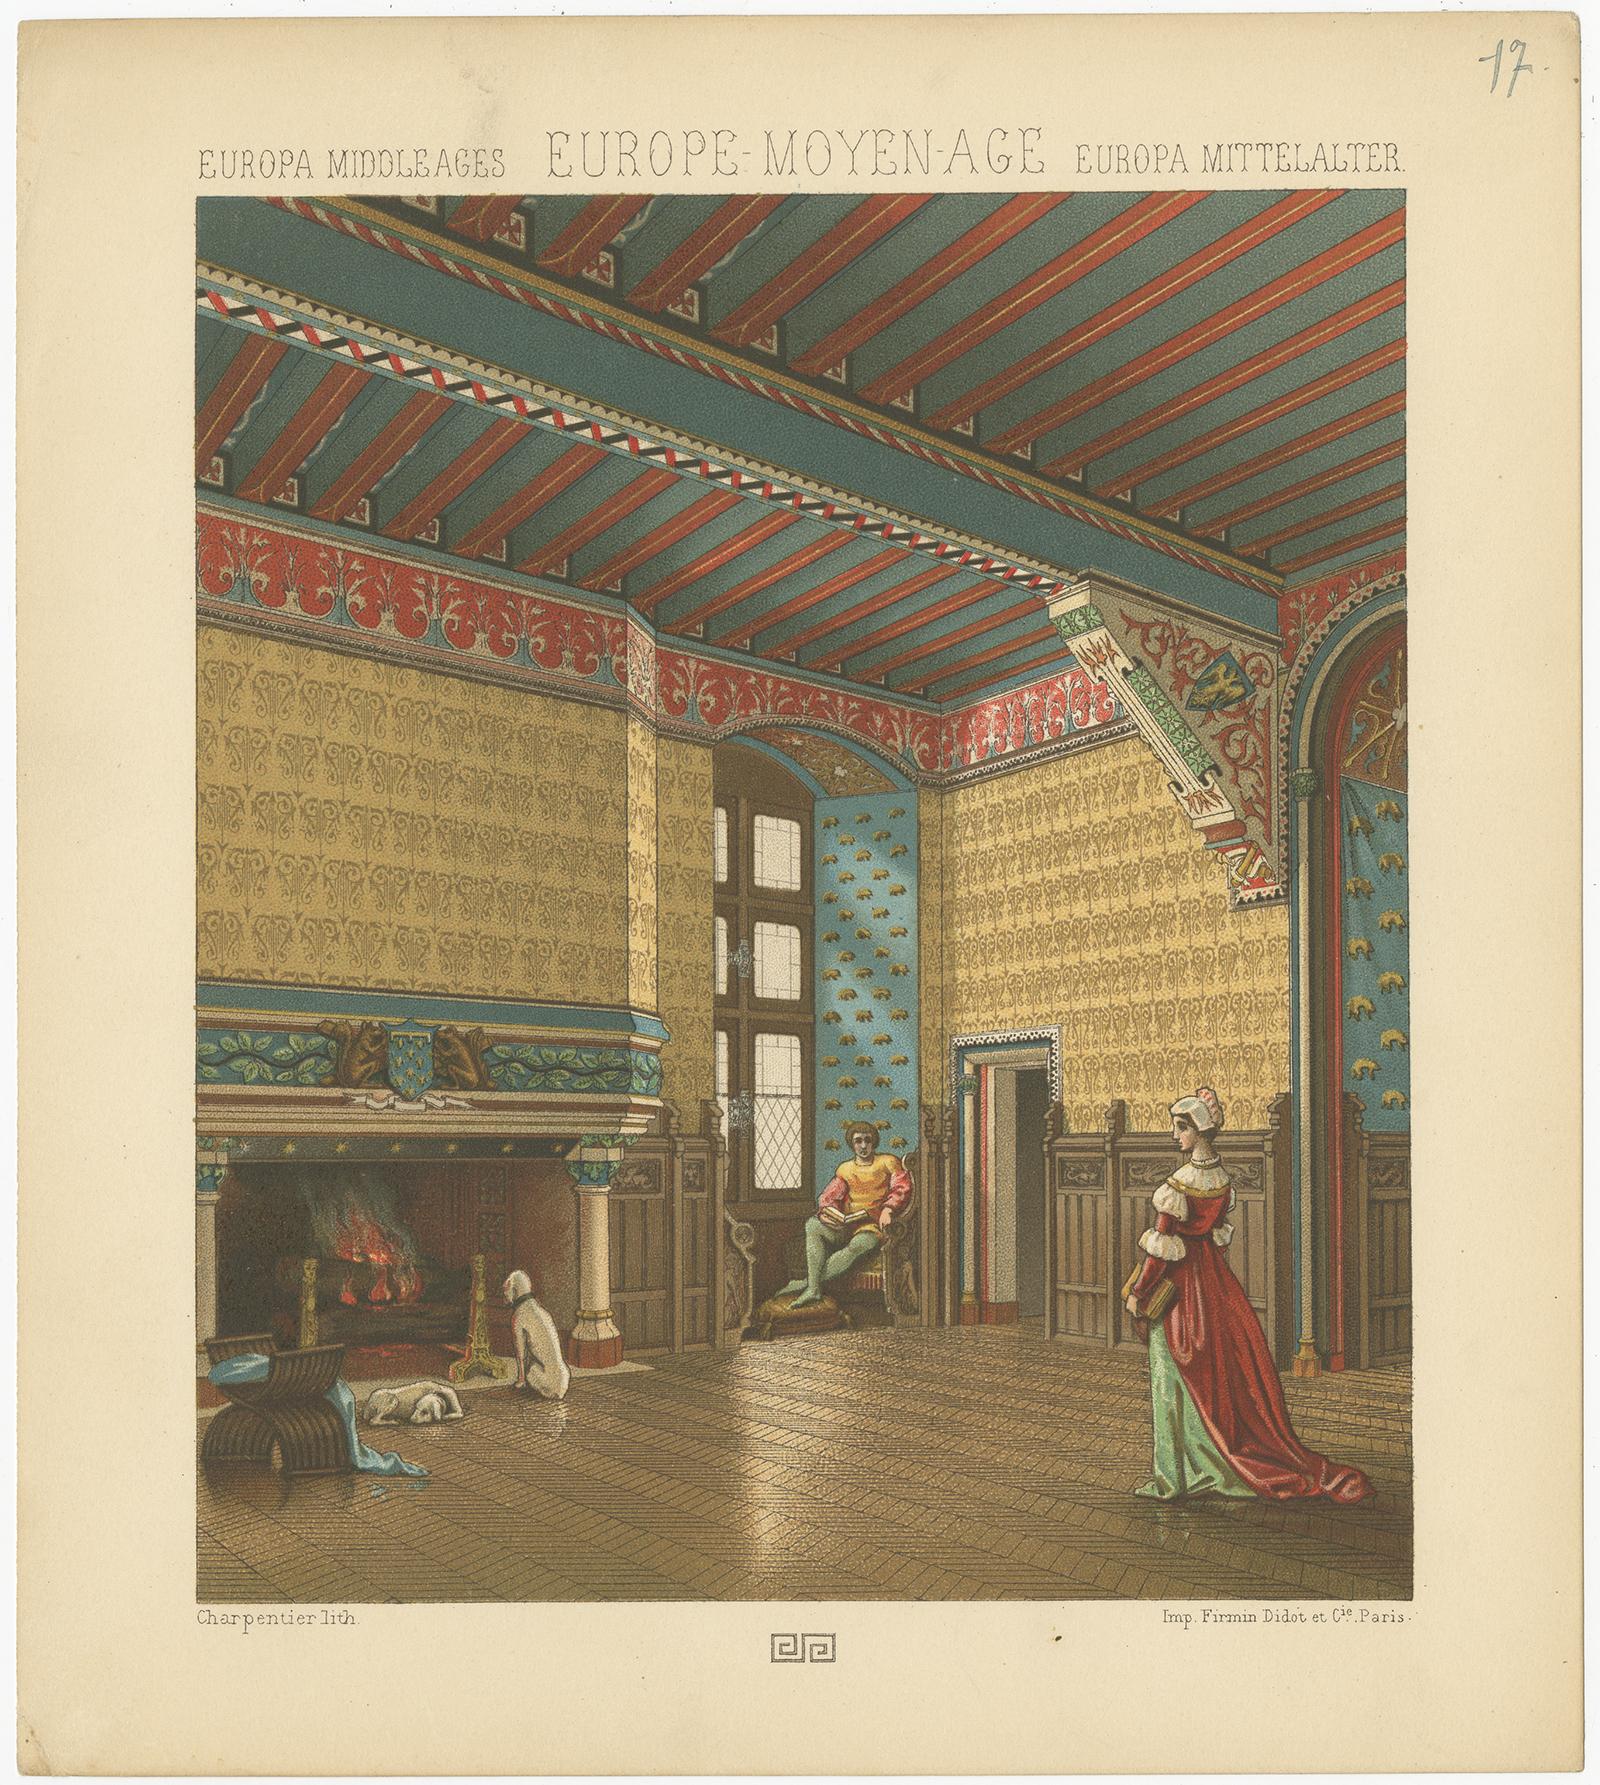 Antique print titled 'Europa Middle Ages - Europe Moyen Age - Europa Mittelalter'. Chromolithograph of European Middle Ages living room. This print originates from 'Le Costume Historique' by M.A. Racinet. Published circa 1880.